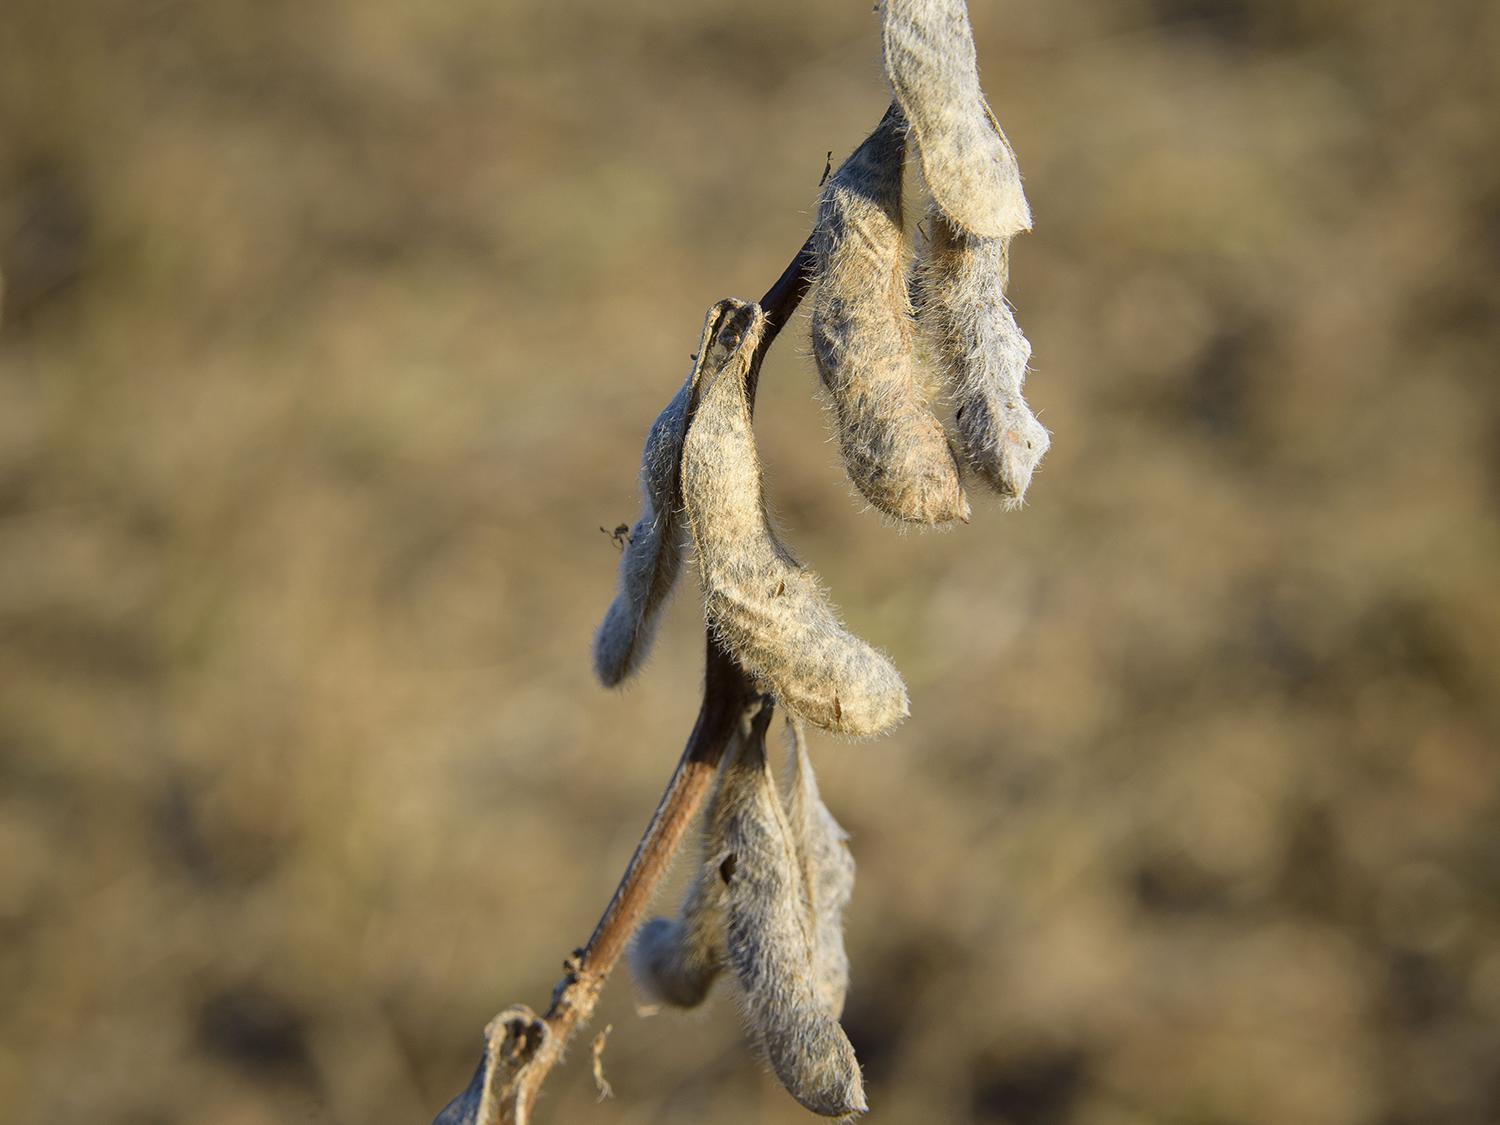 Photo shows mature, dried soybean pods hanging against a brown, natural background.